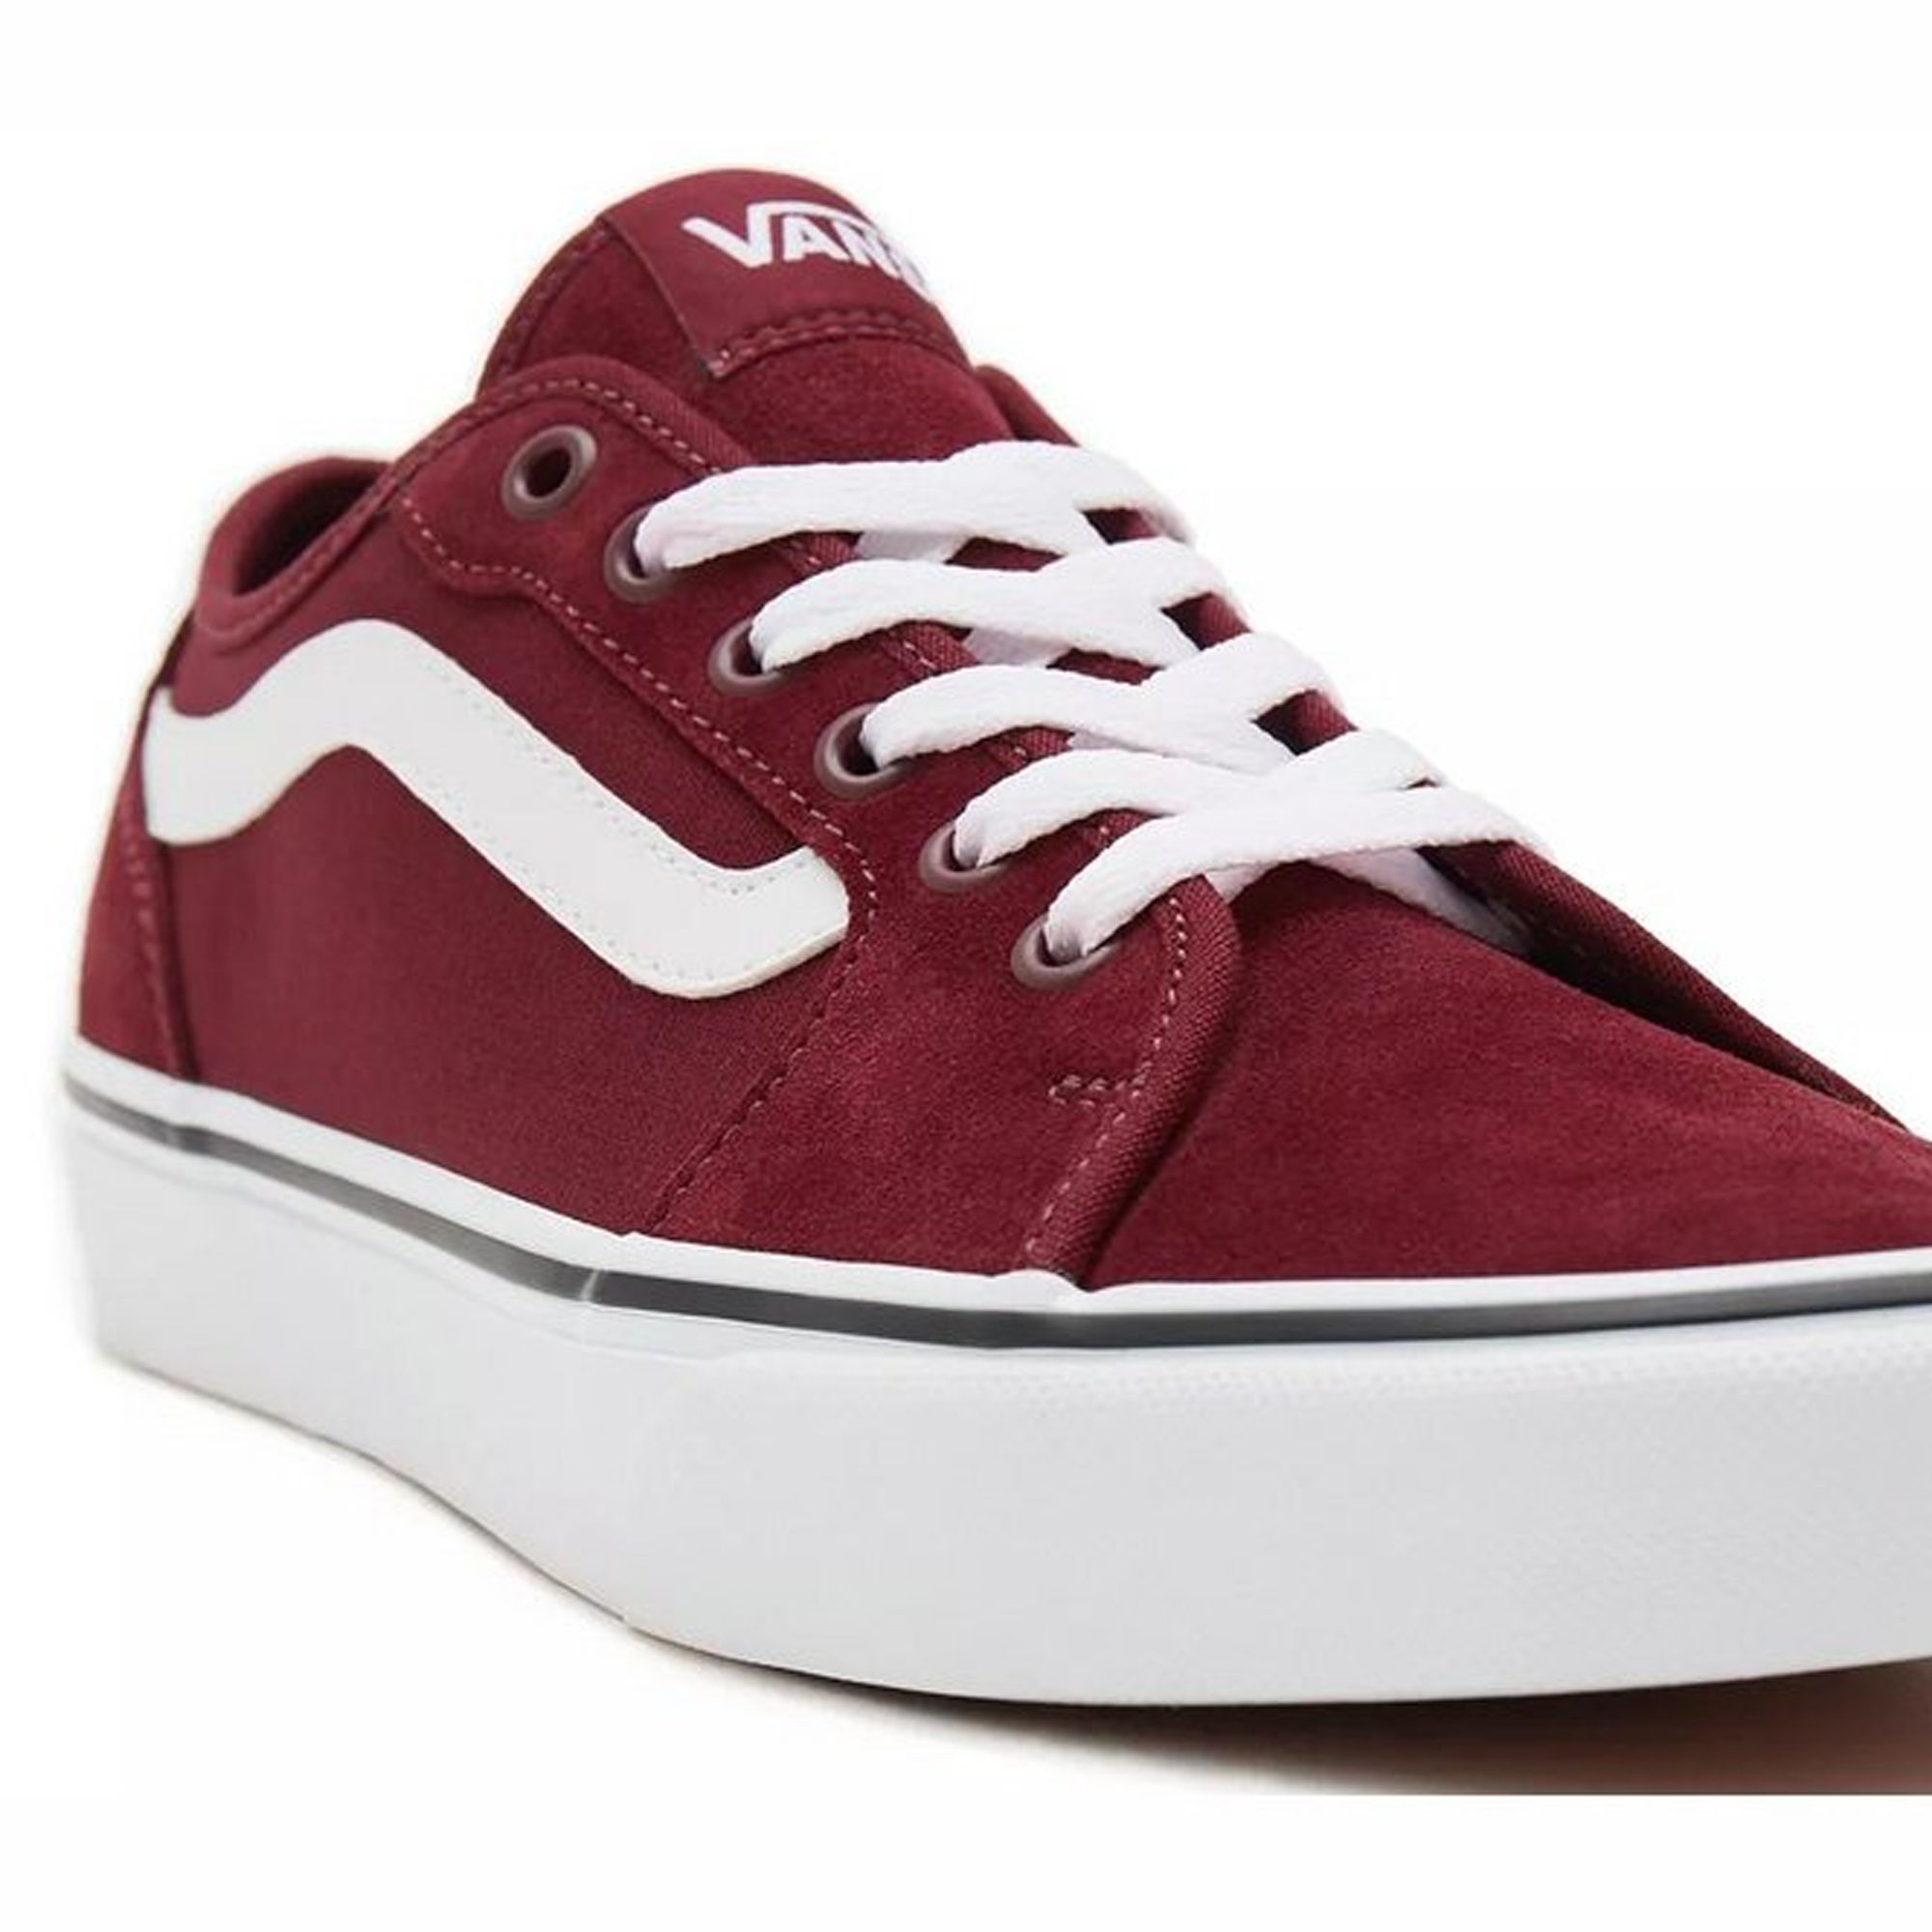 OEM VANS CLASSIC ALL RED SNEAKER SHOES FOR MEN AND WOMEN | Shopee  Philippines